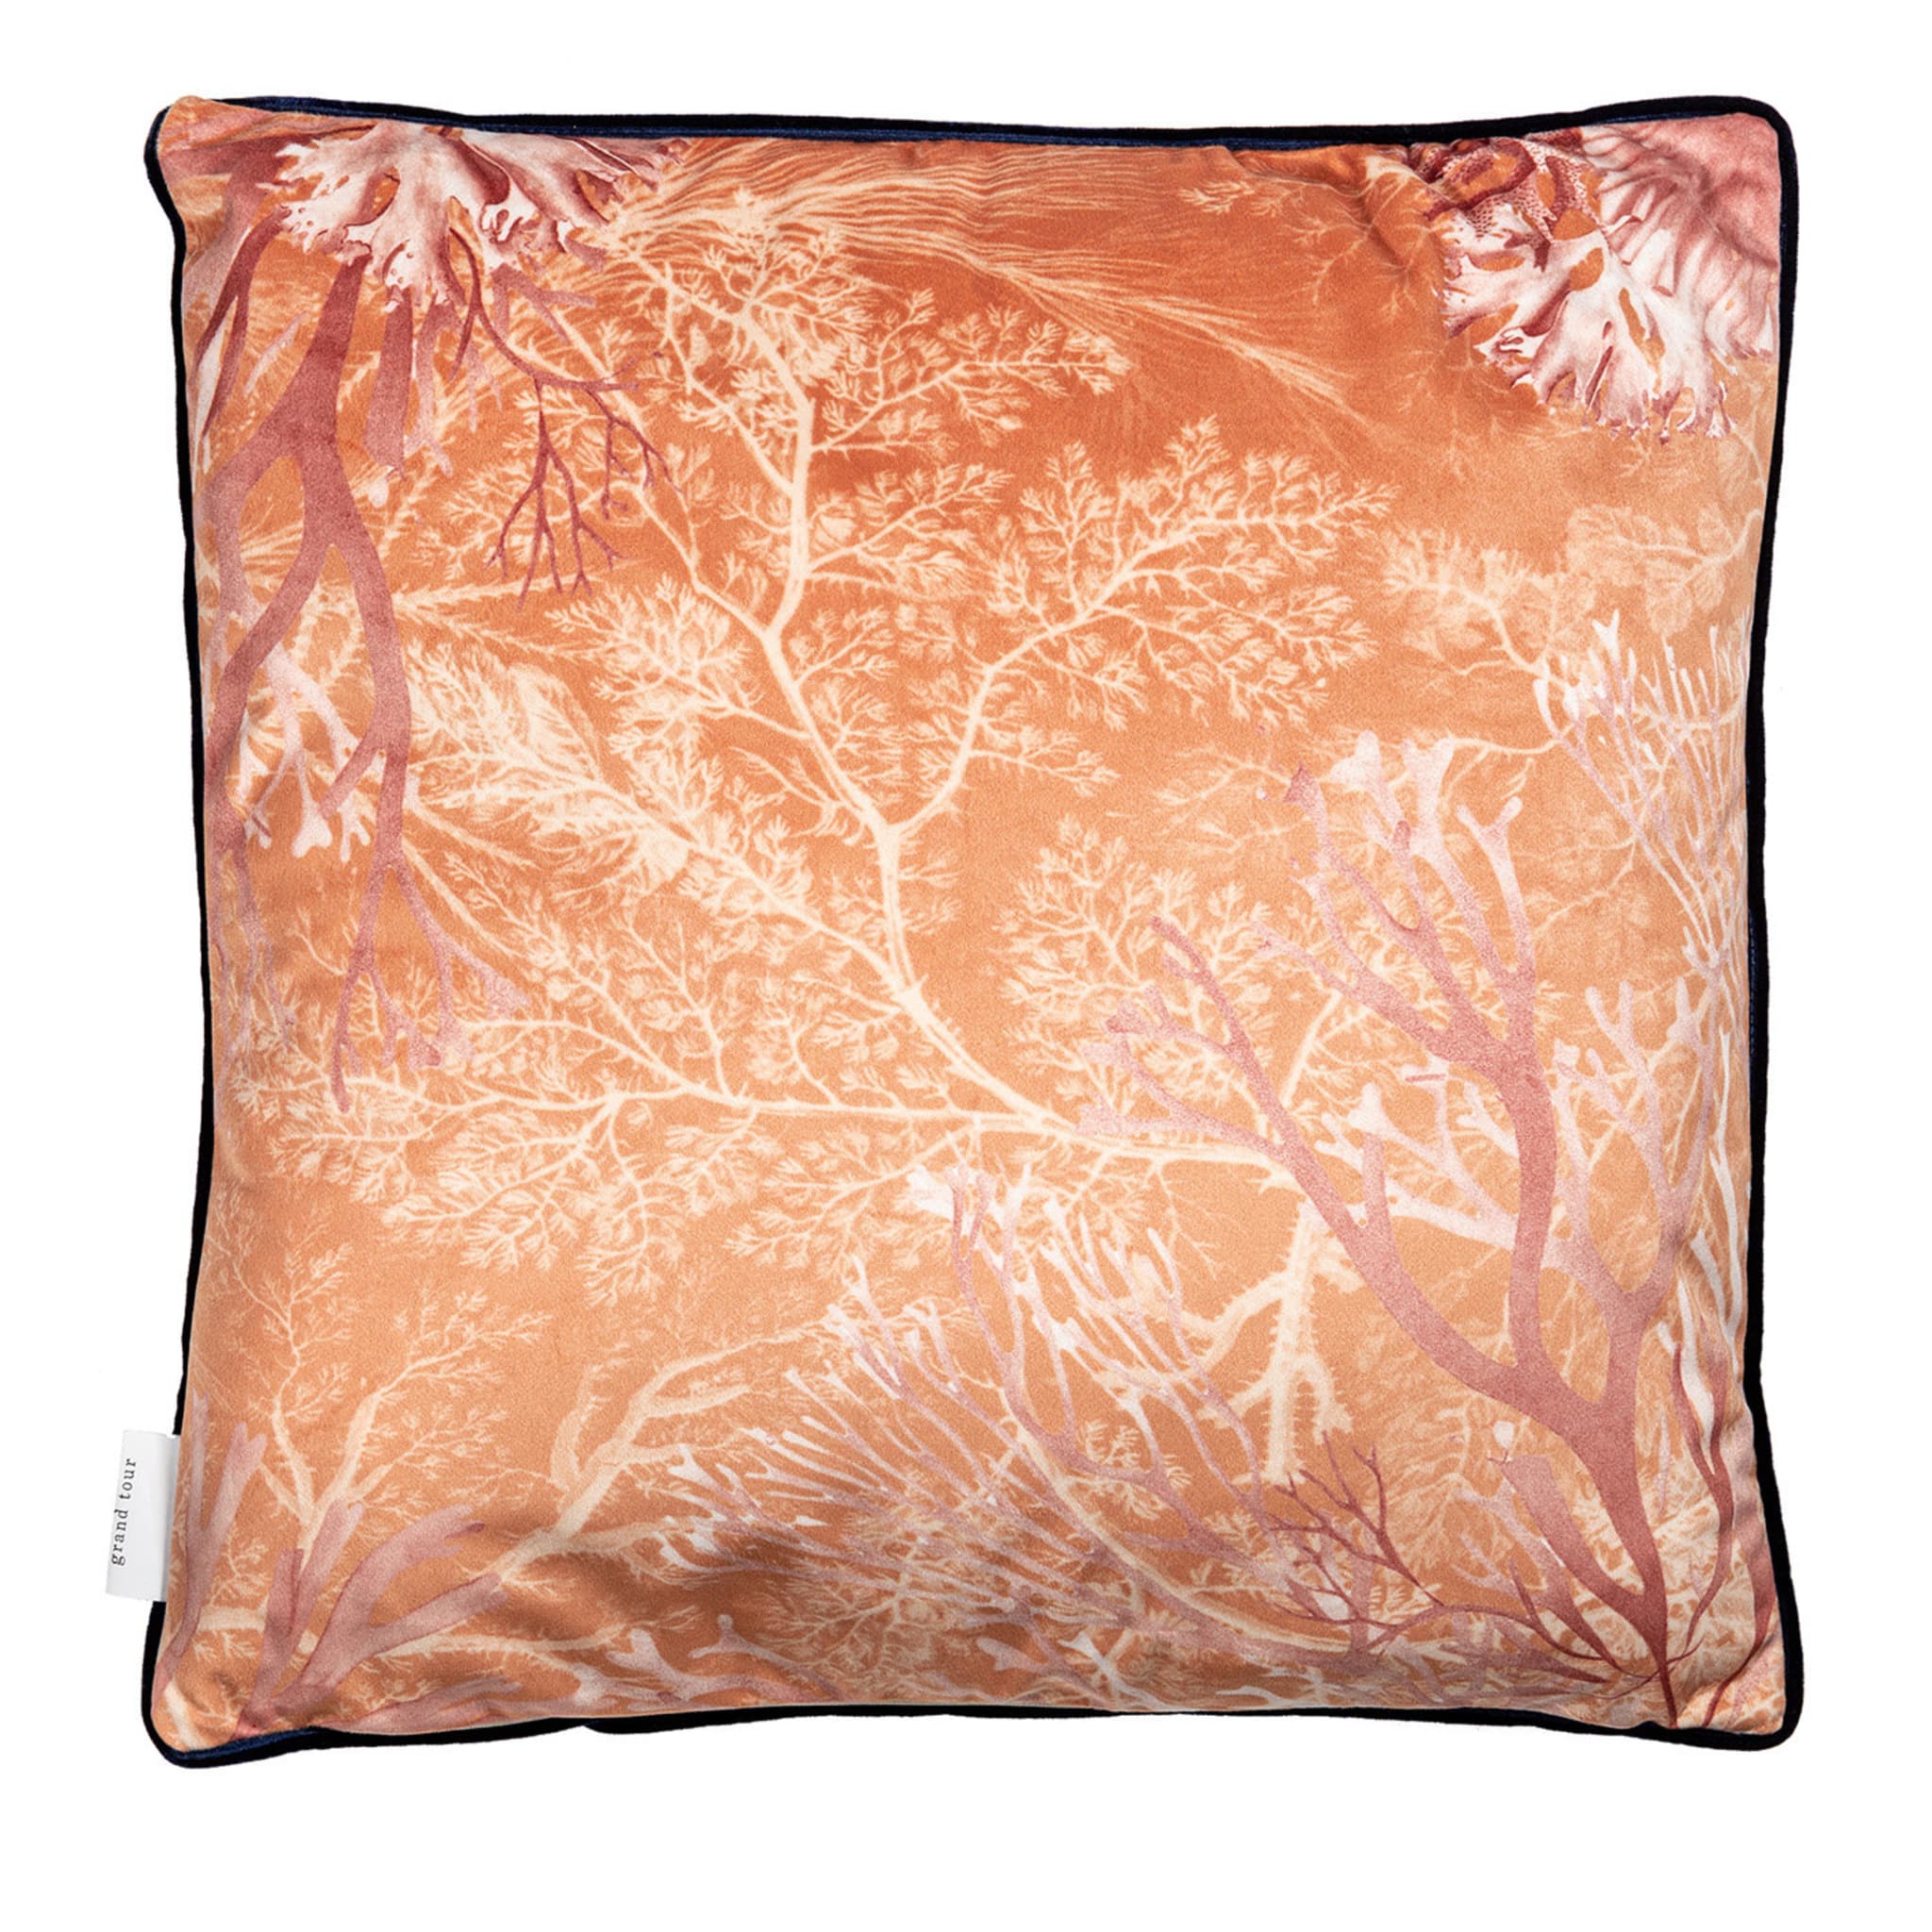 Amami Islands Velvet Cushion With Tropical Fish #4 - Alternative view 1